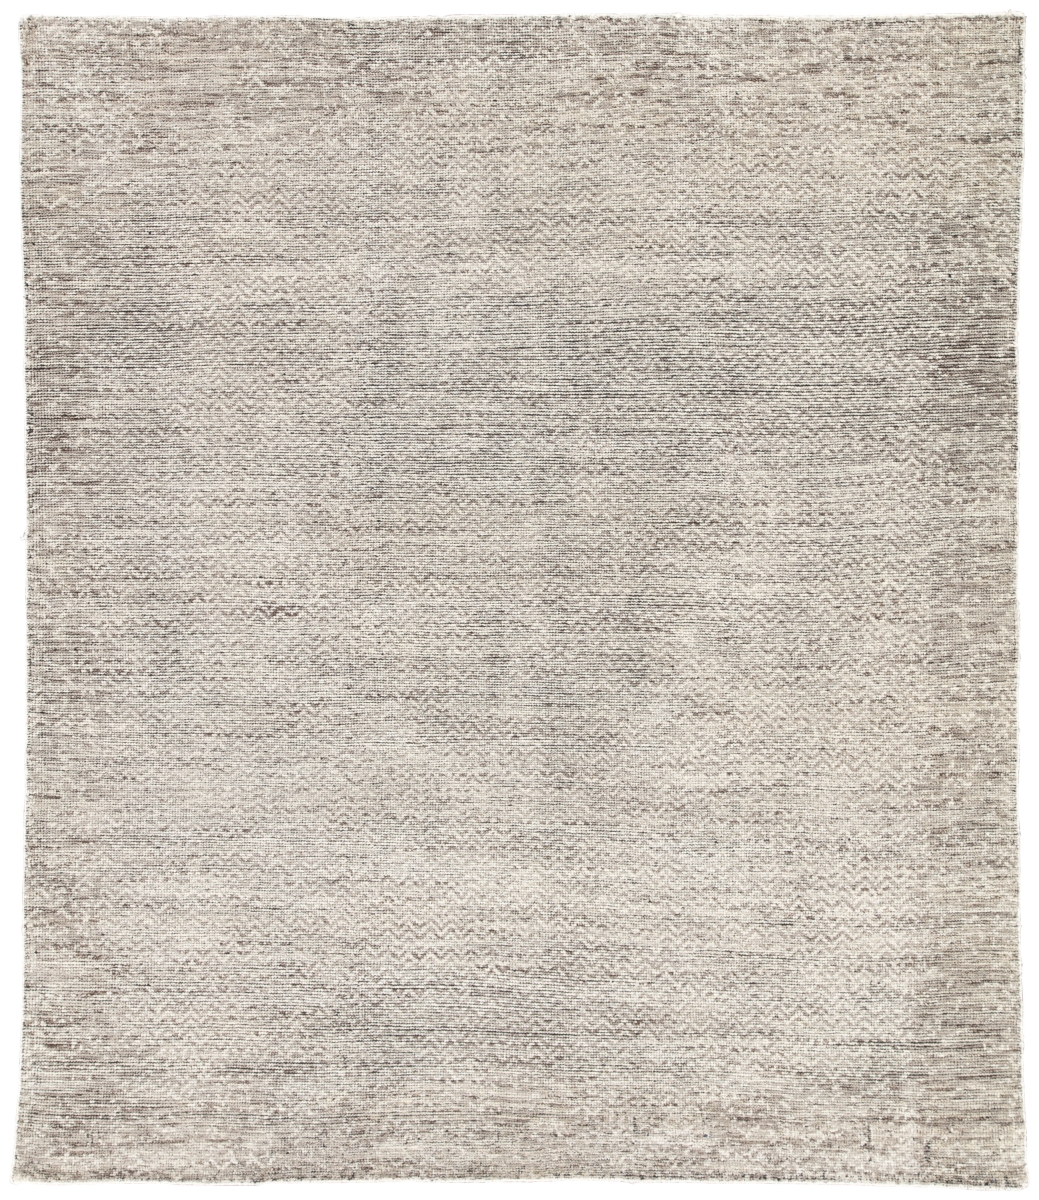 Rug138509 2 X 3 Ft. Rize Shervin Hand-knotted Chevron Dark Gray & Ivory Area Rug